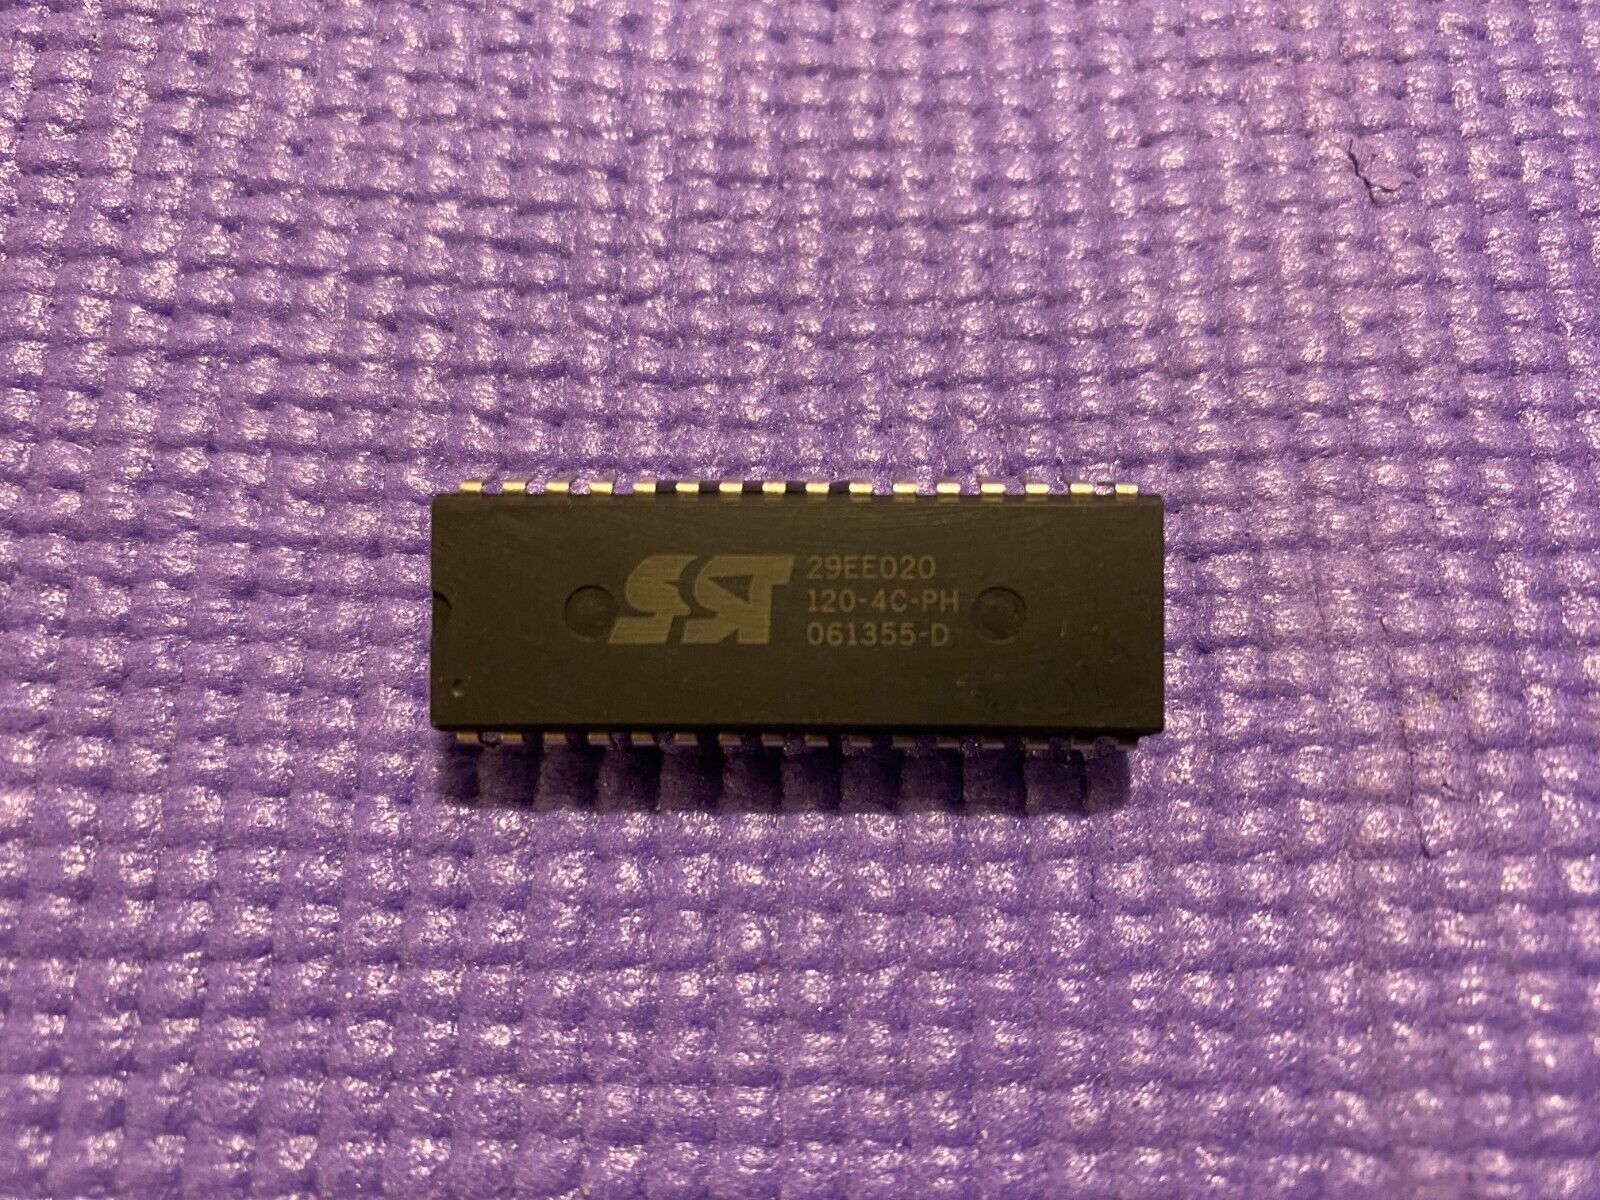 CMOS 32 pin DIP BIOS chip SST 29EE020 (We can program it for free)